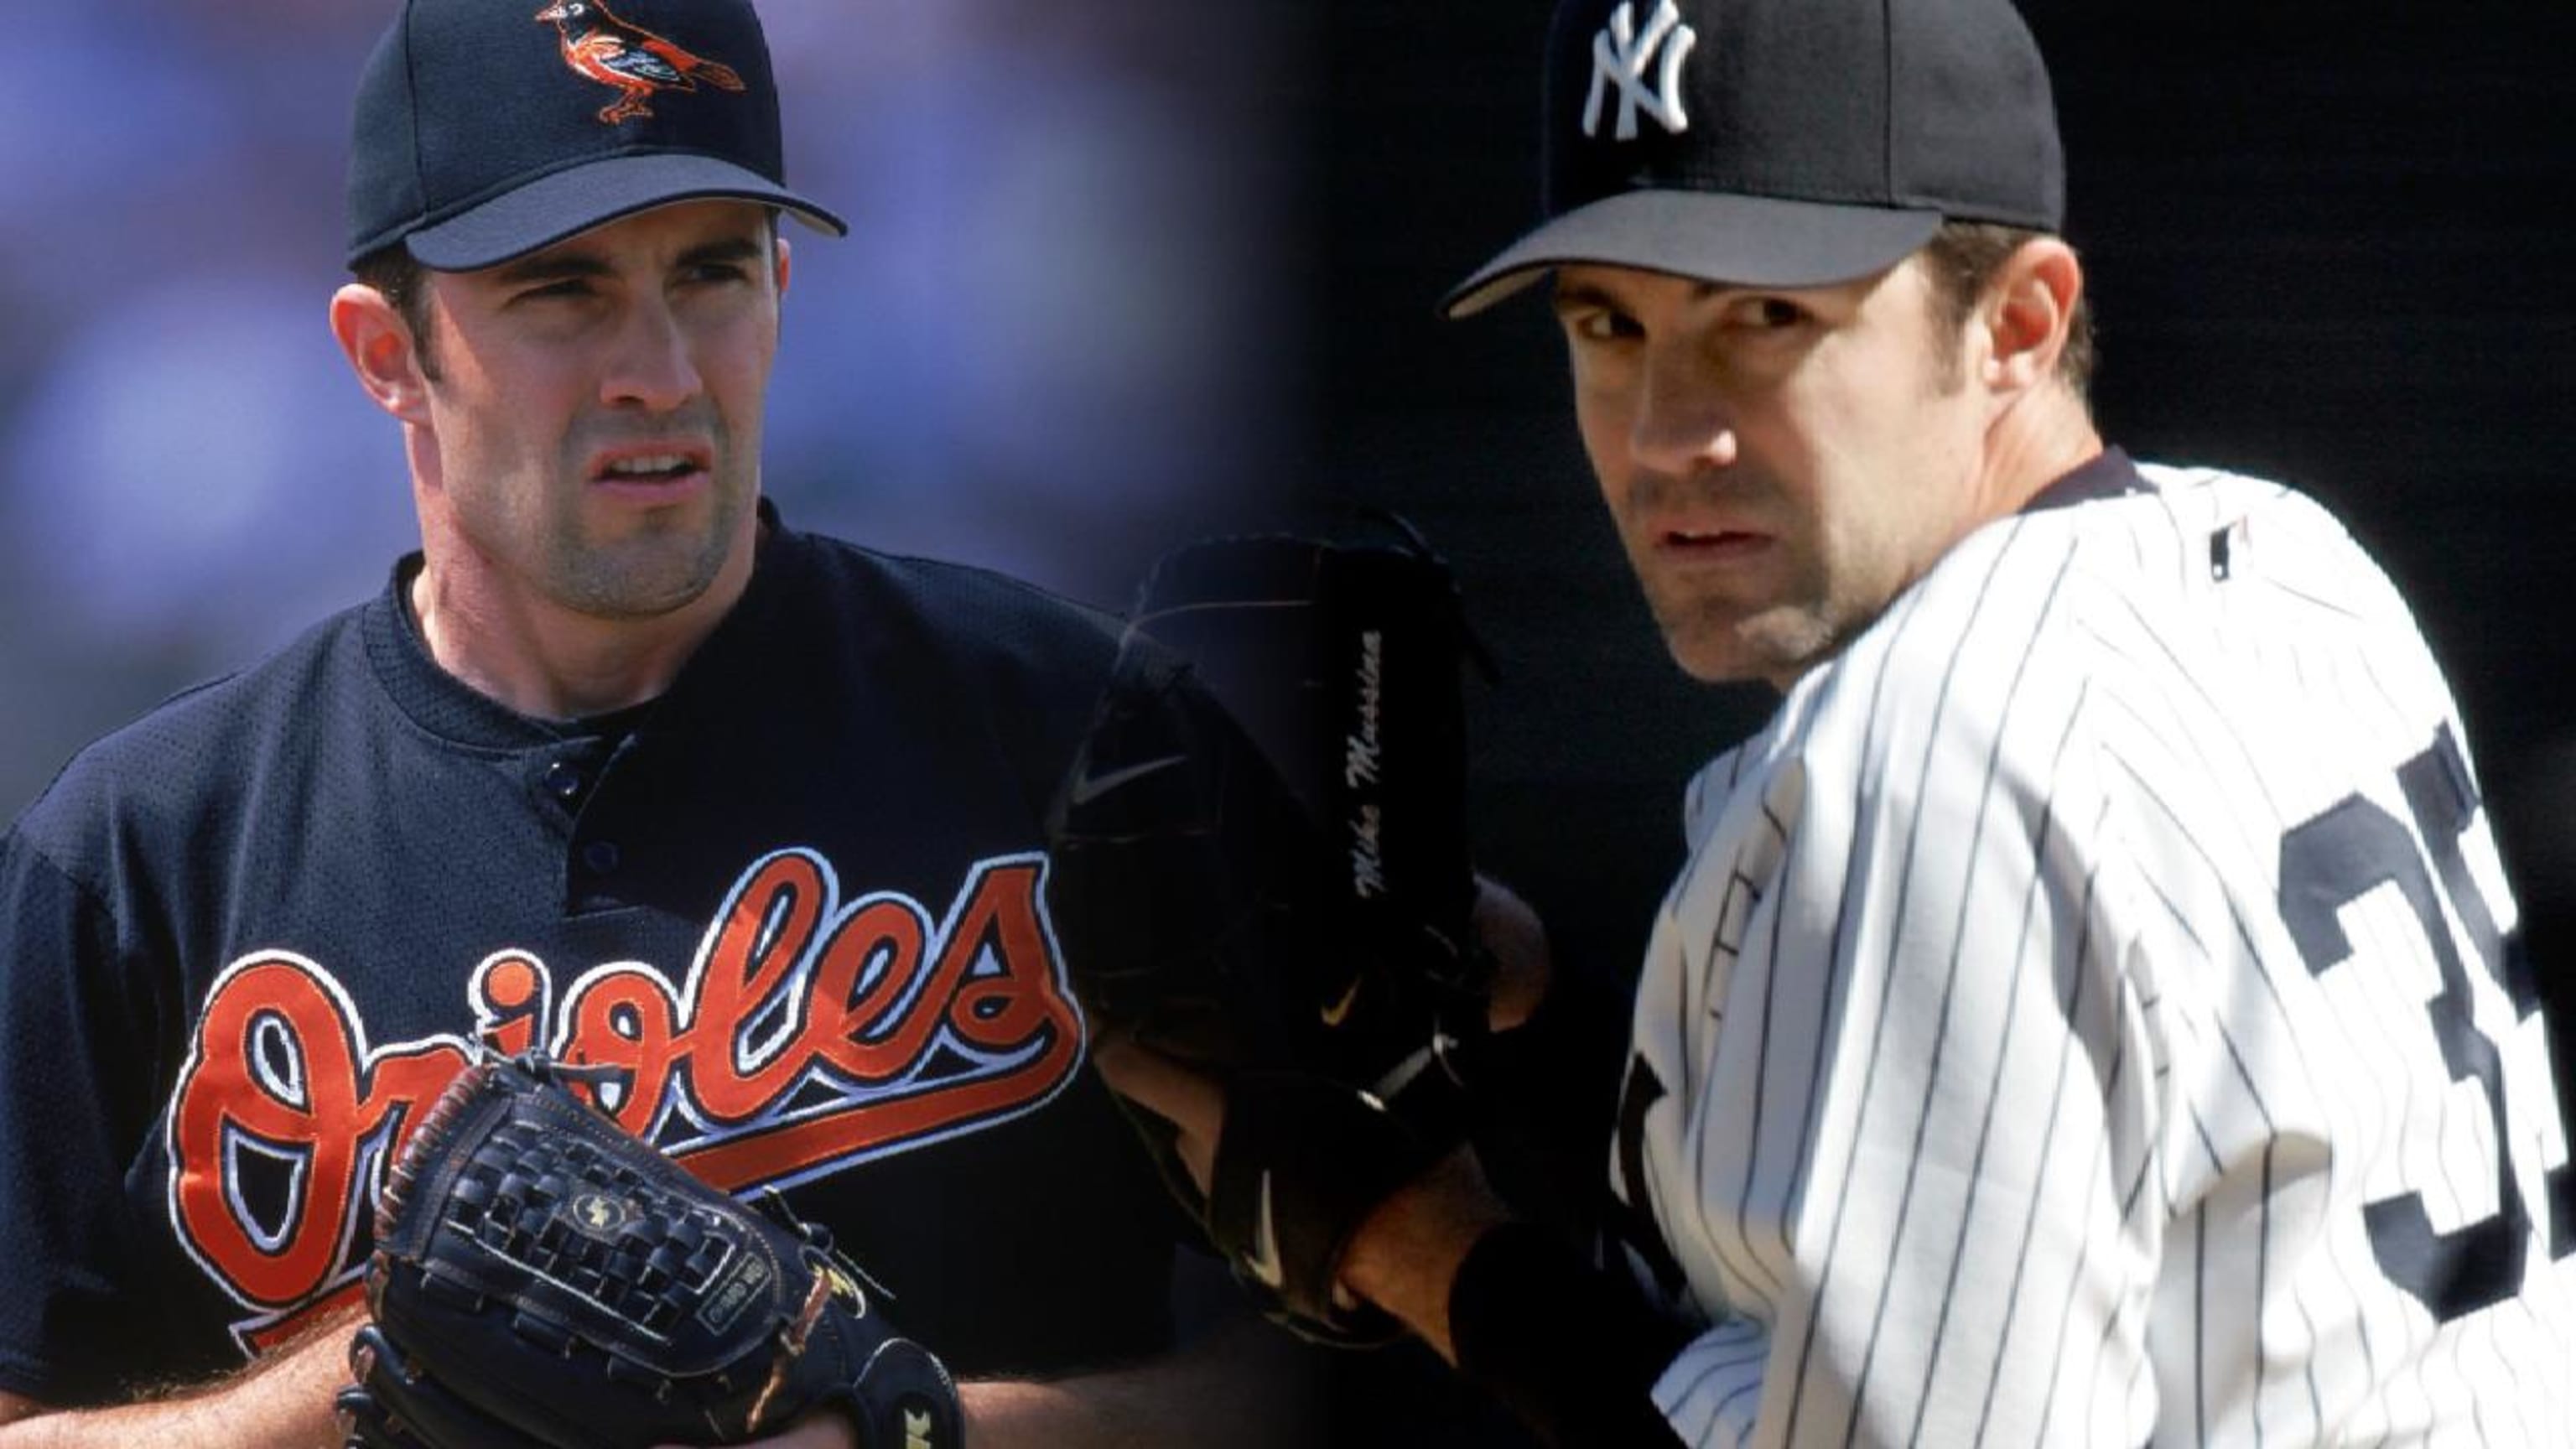 Mike Mussina will not wear Yankees cap in Hall of Famenor